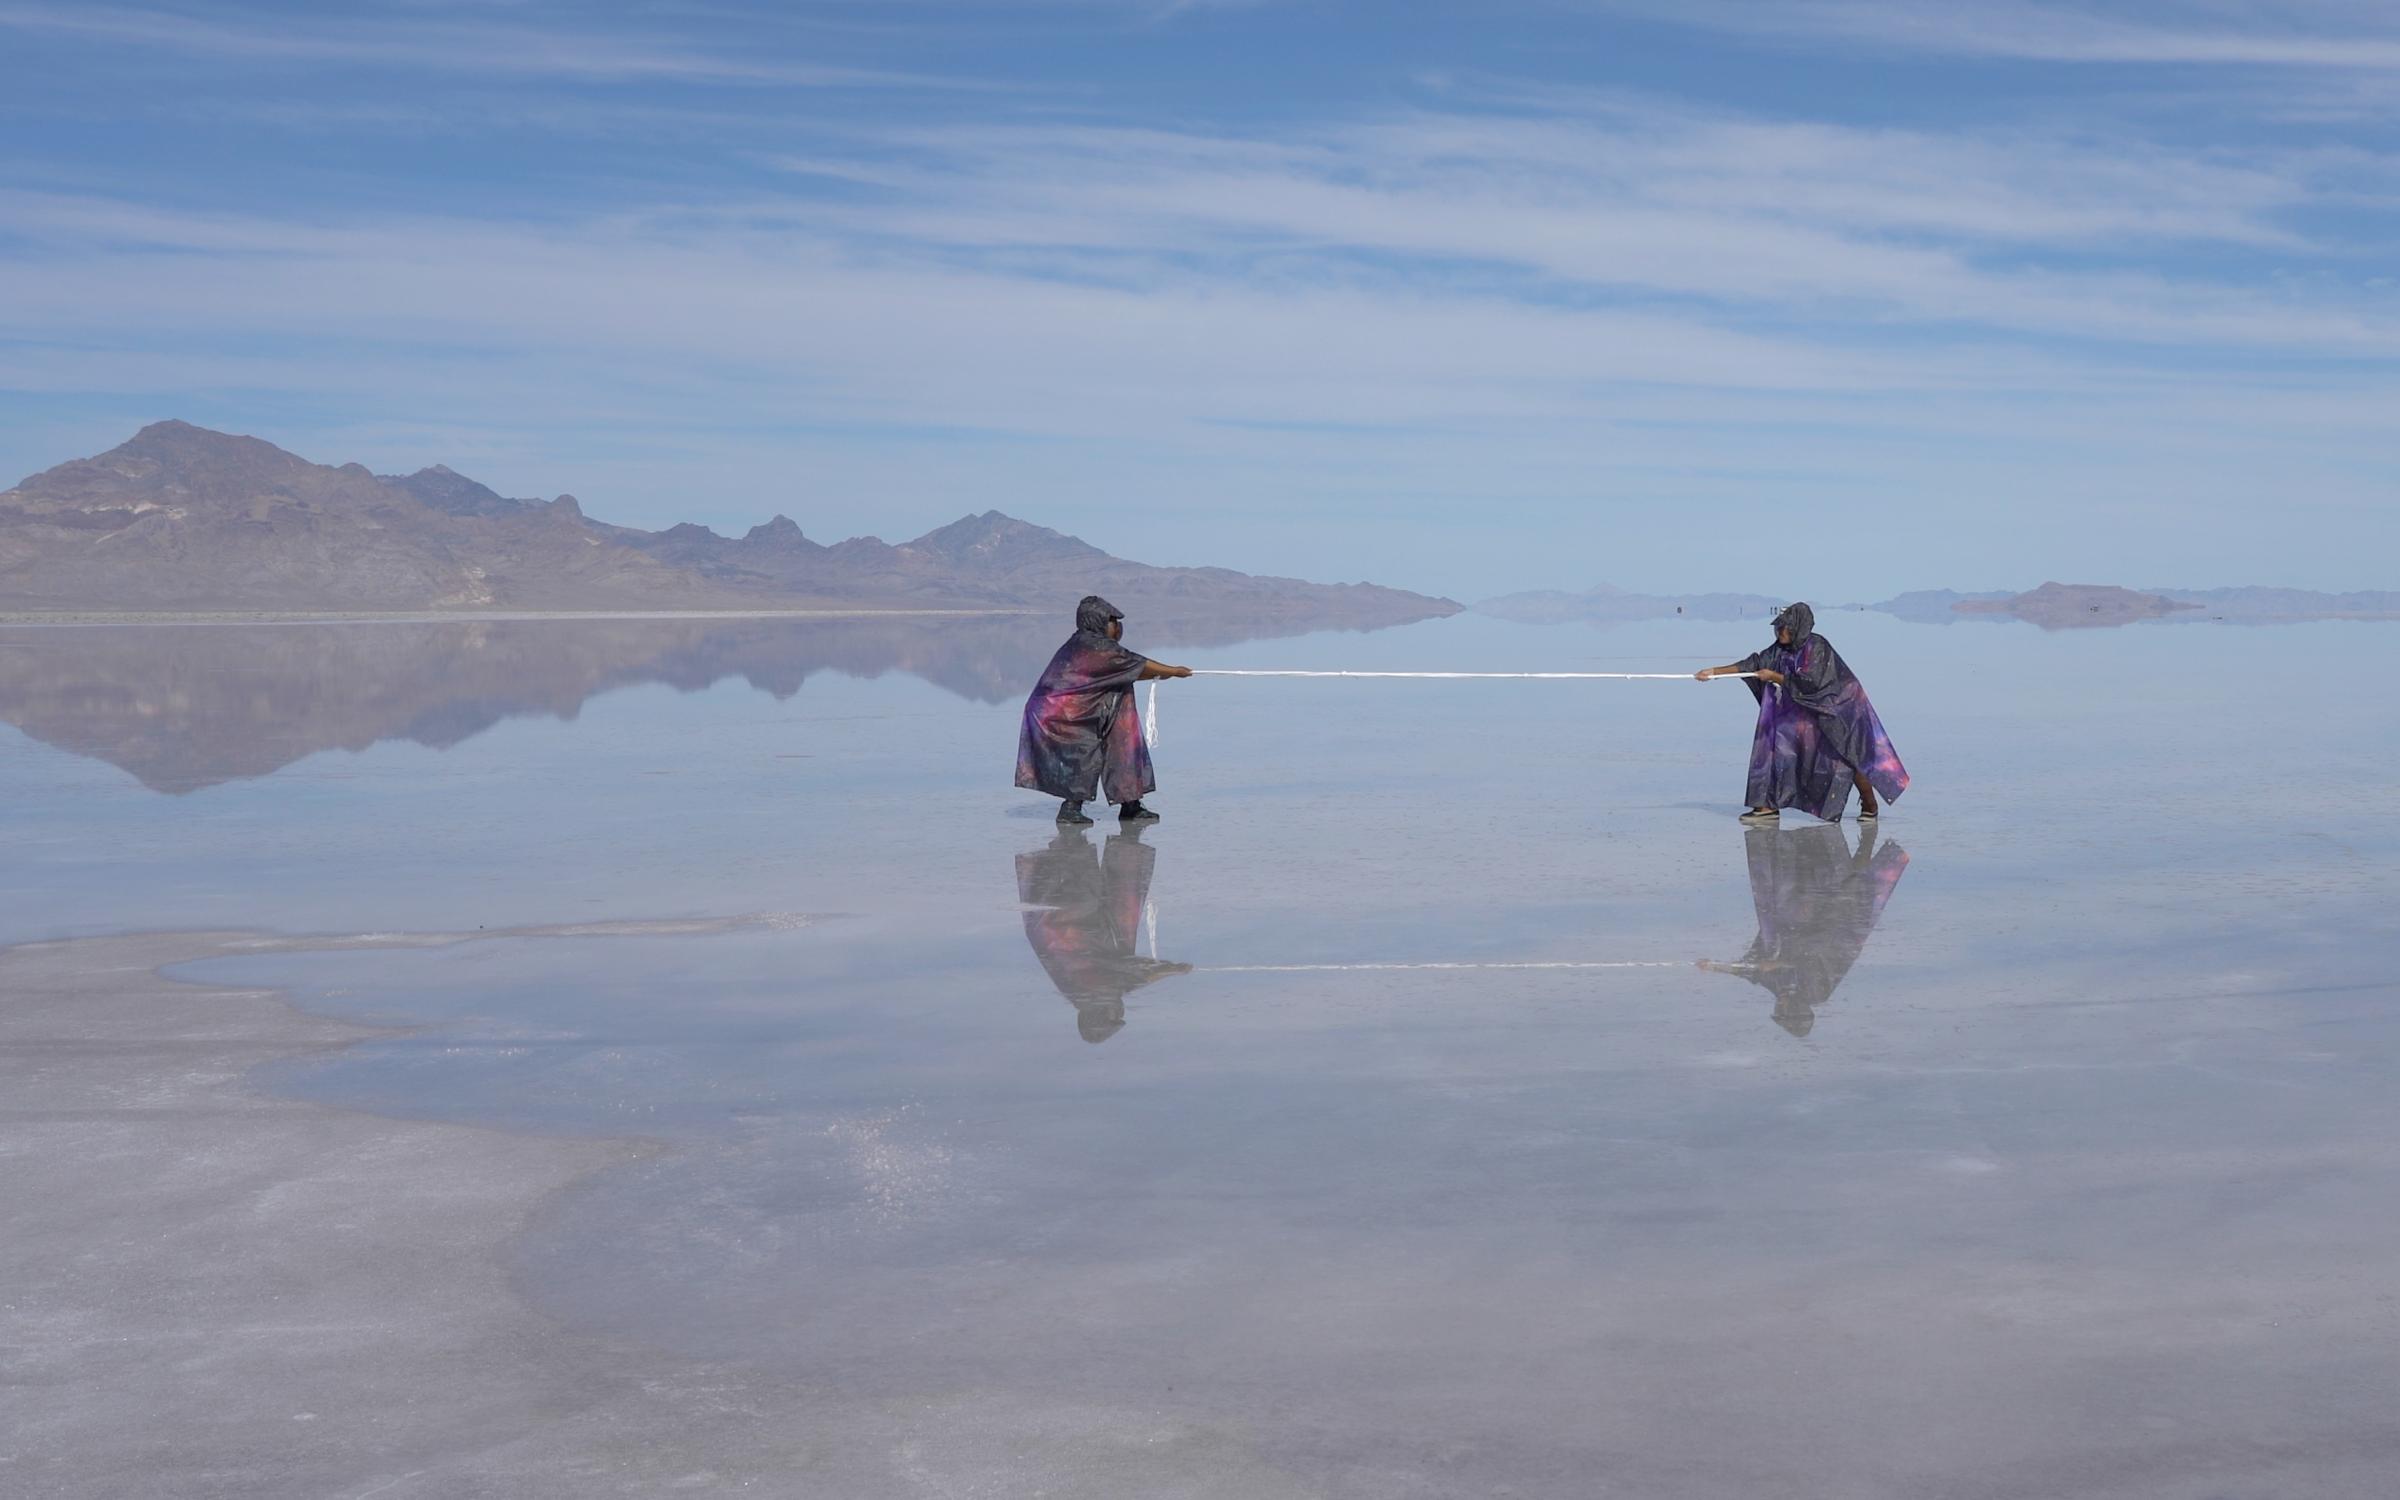 Two black cloaked people pulling a string in a reflective lake with a blue sky and shadowy mountain.